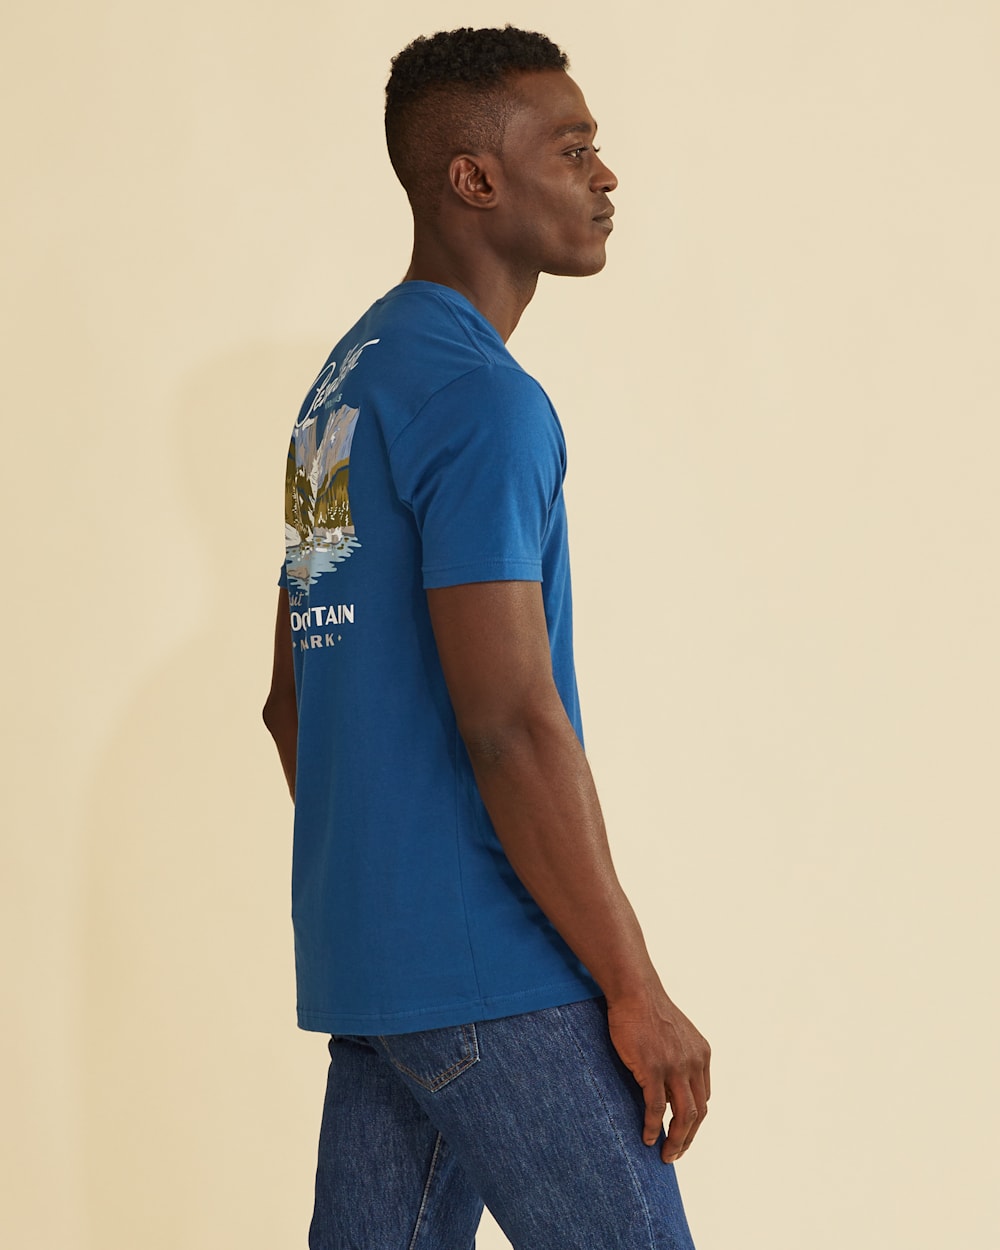 ALTERNATE VIEW OF MEN'S HERITAGE ROCKY MOUNTAIN TEE IN COOL BLUE/WHITE image number 3